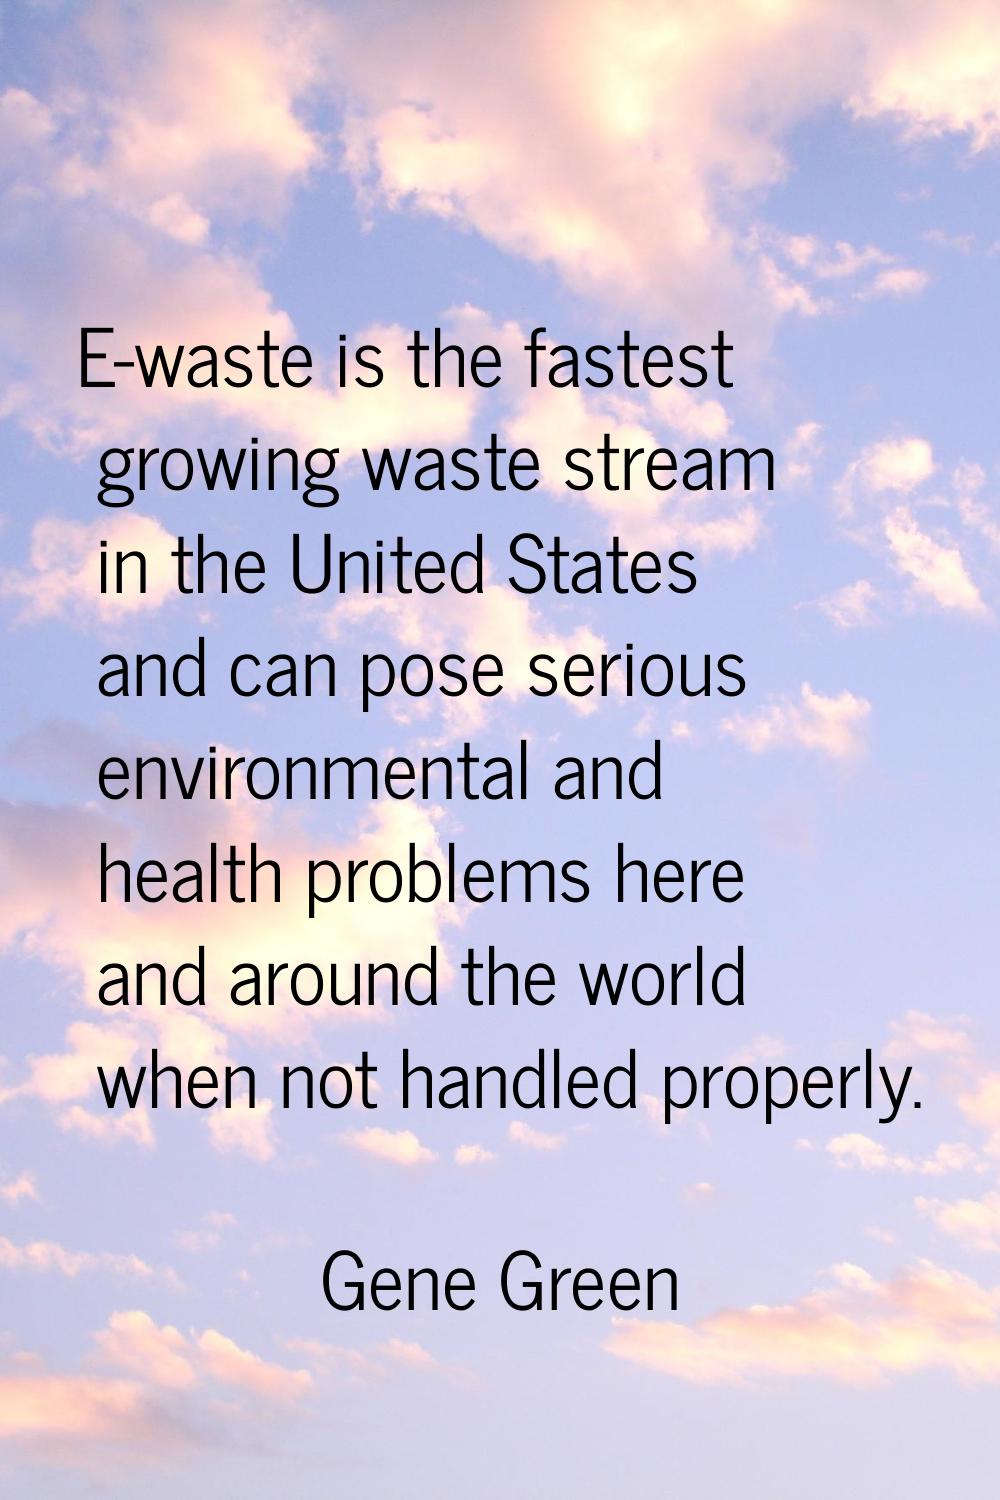 E-waste is the fastest growing waste stream in the United States and can pose serious environmental